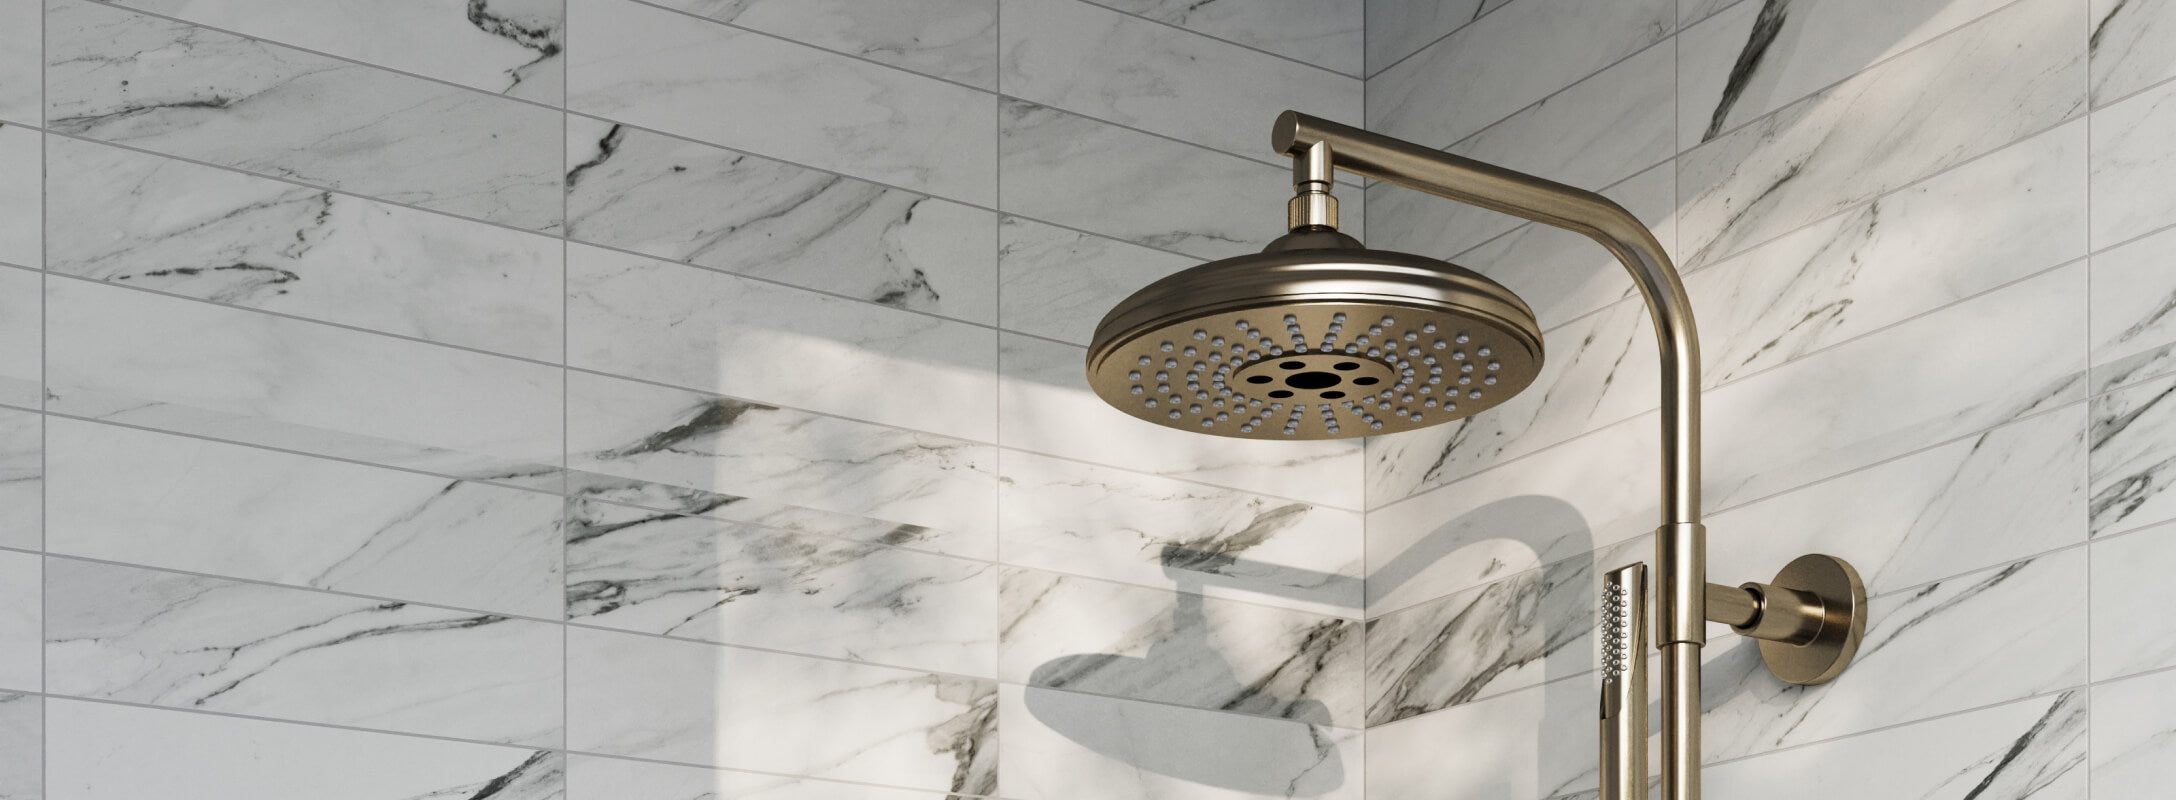 Elegant shower with light grey marble look tiles and a brass rainfall showerhead, creating a luxurious and timeless look